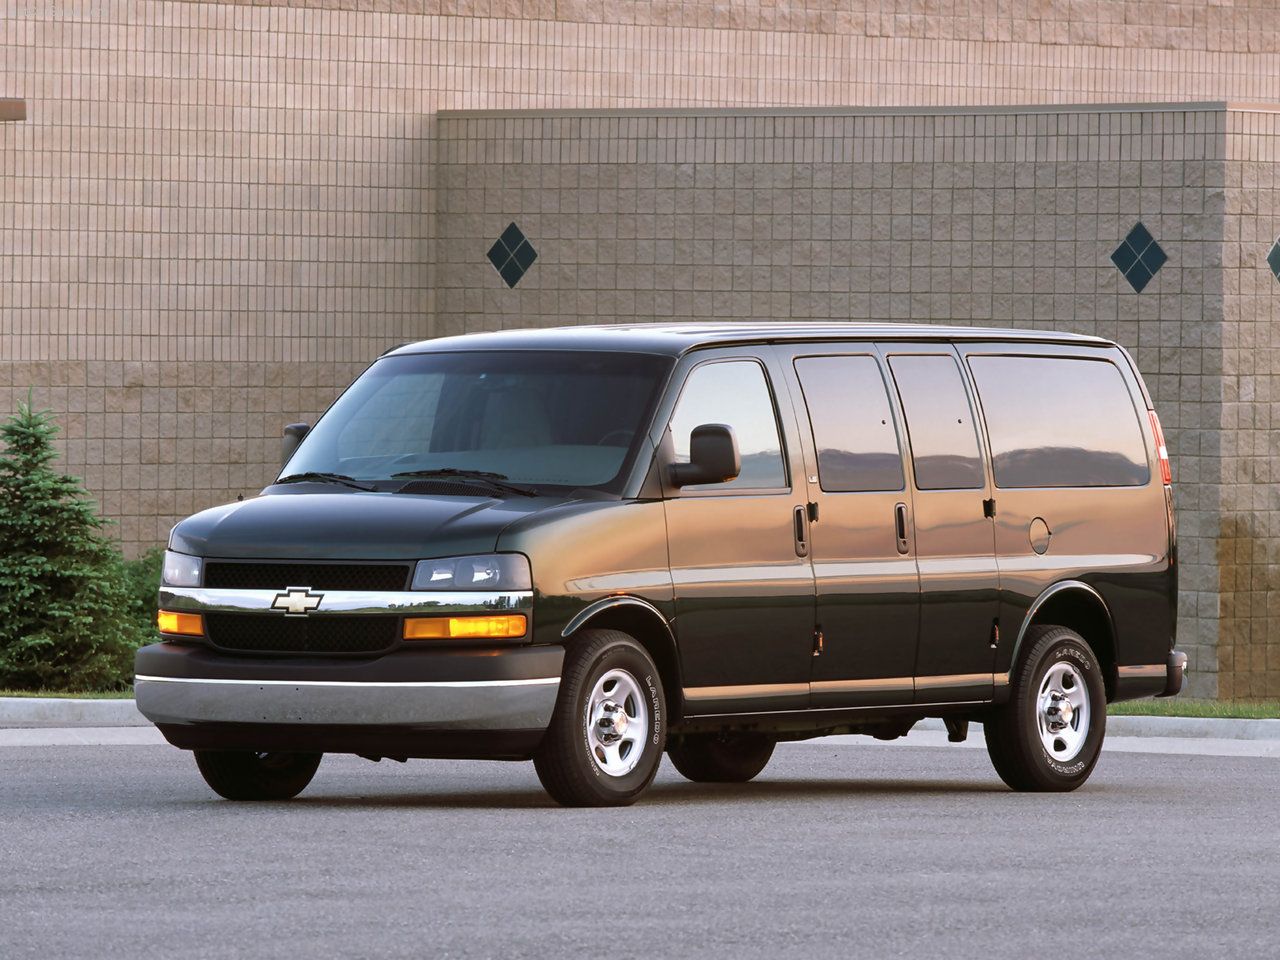 Chevrolet Express Full Front And Side Wallpaper 1280x960